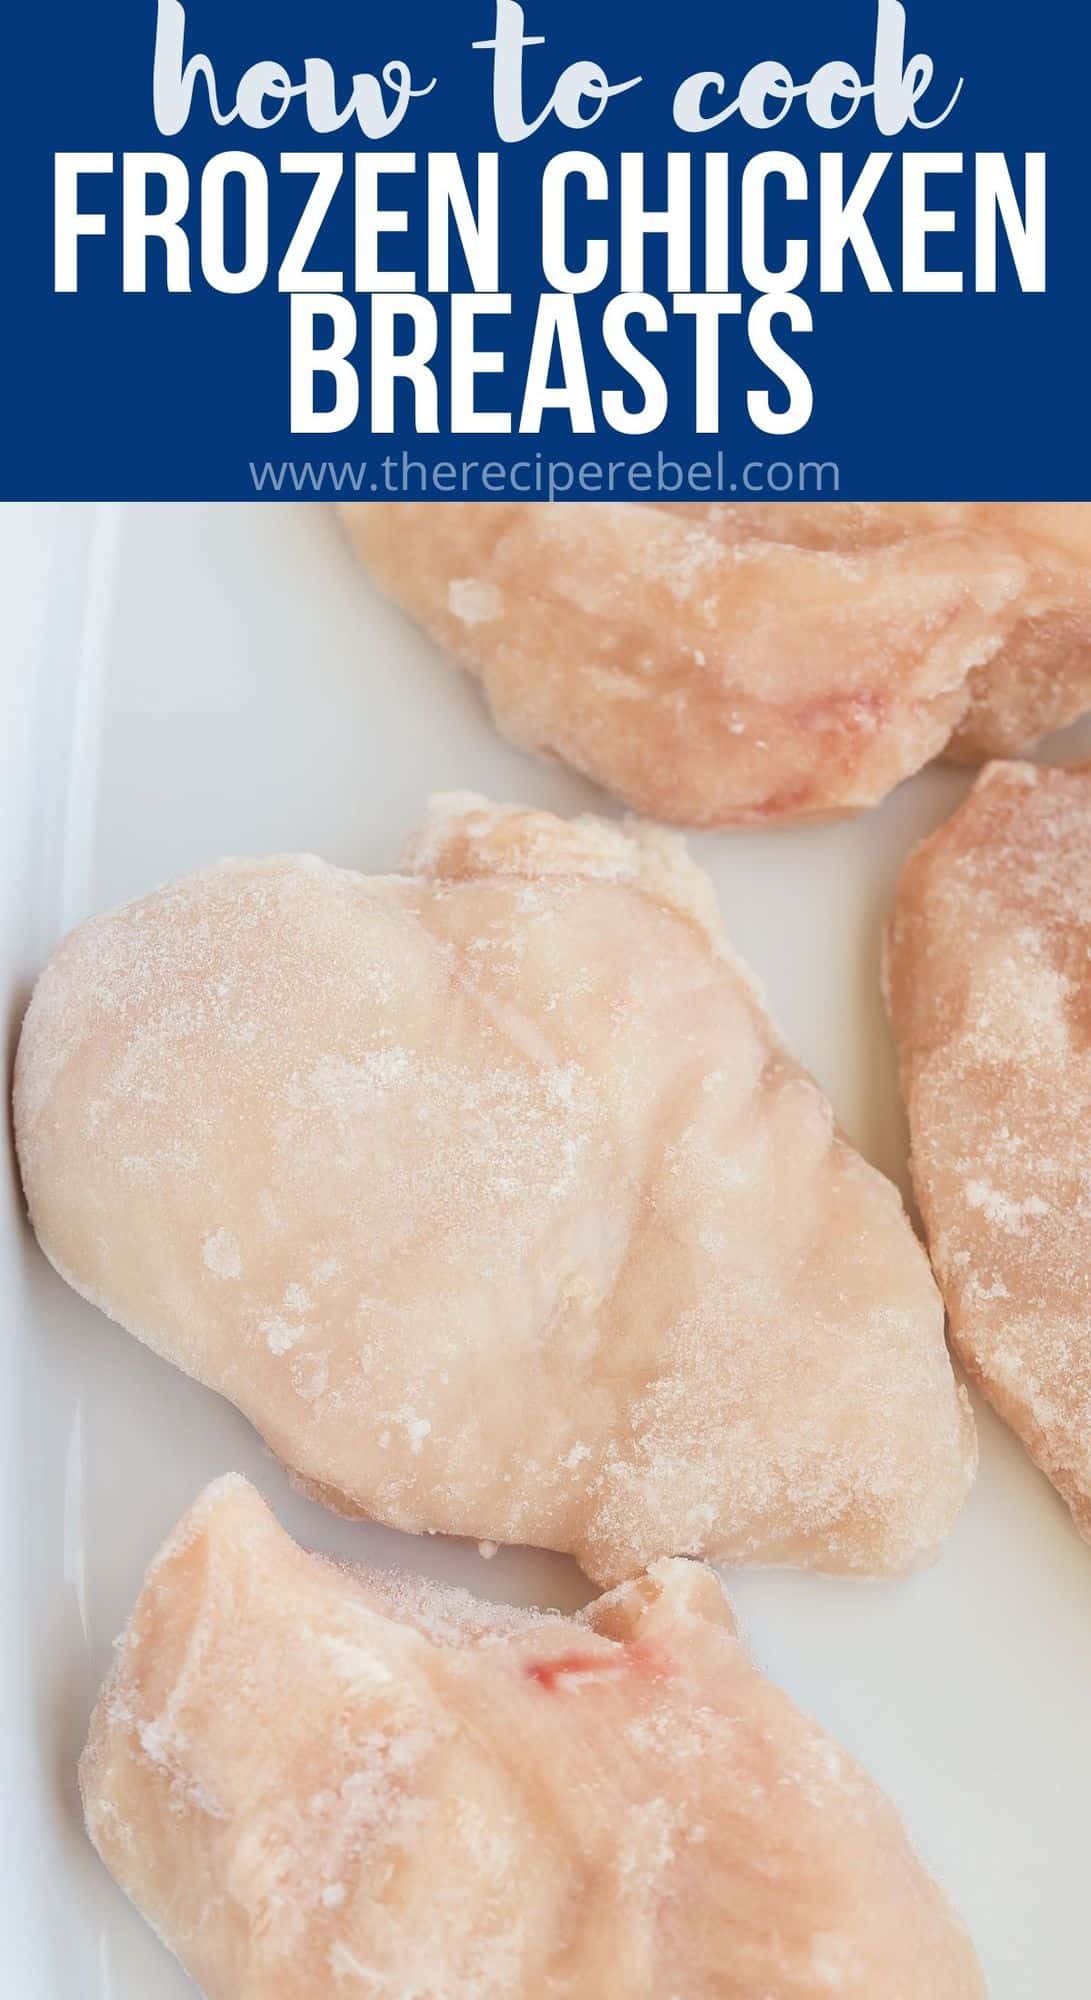 https://www.thereciperebel.com/wp-content/uploads/2021/04/how-to-cook-frozen-chicken-breasts-www.thereciperebel.com-pin-2.jpg